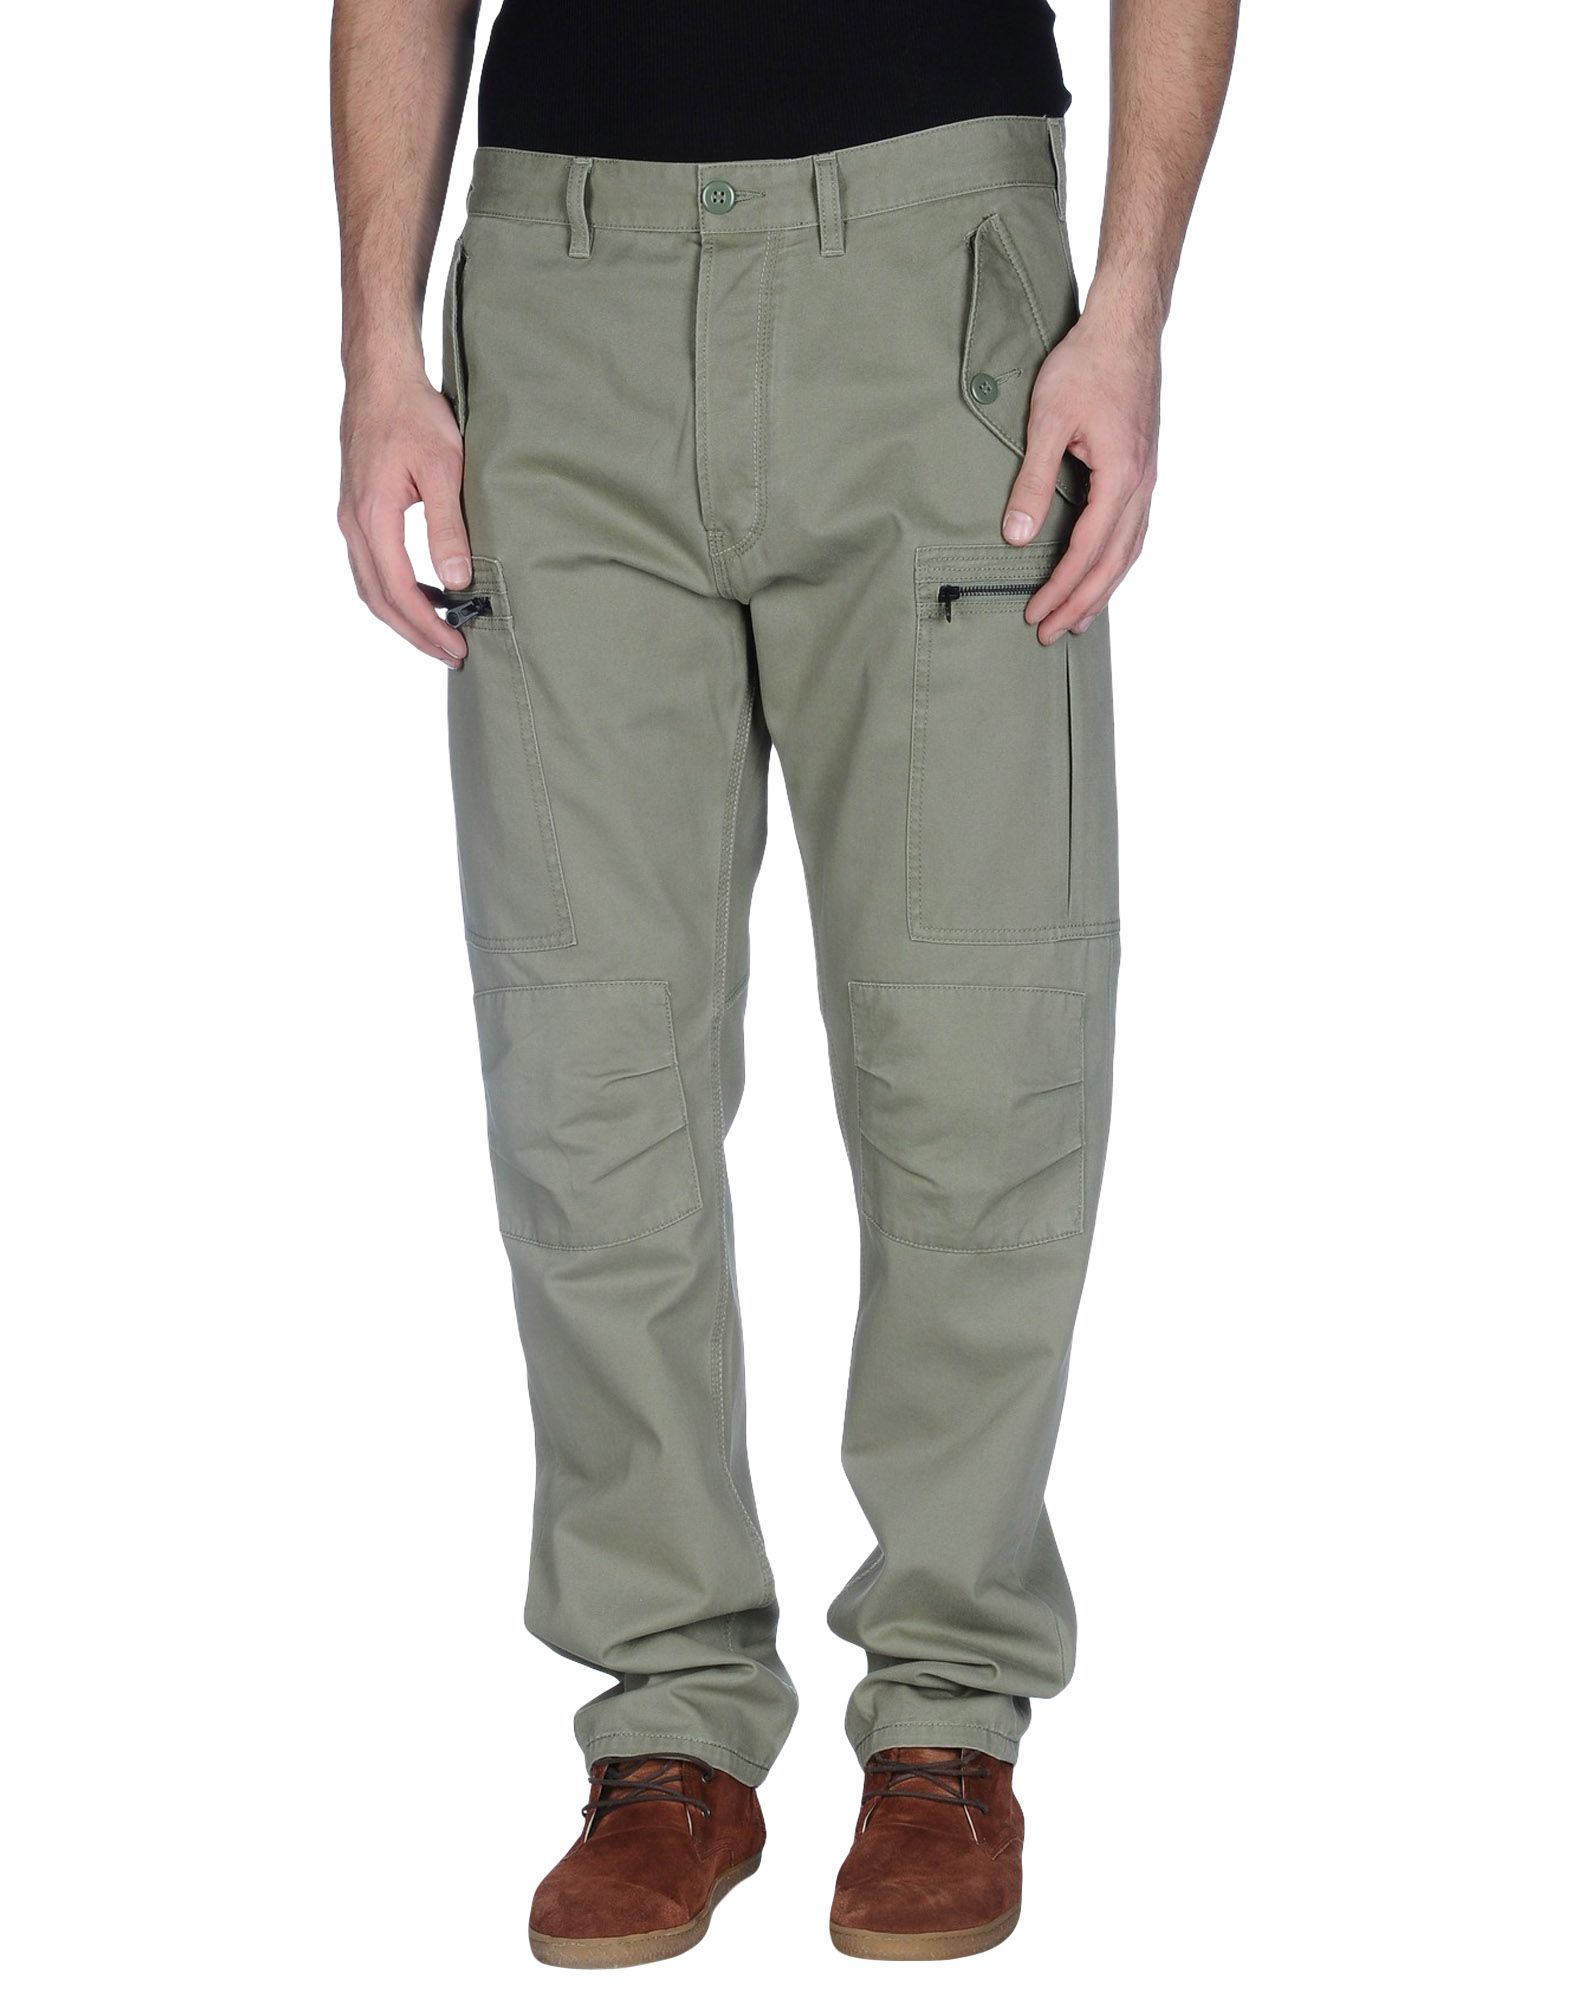 Lyst - French Connection Casual Pants in Green for Men